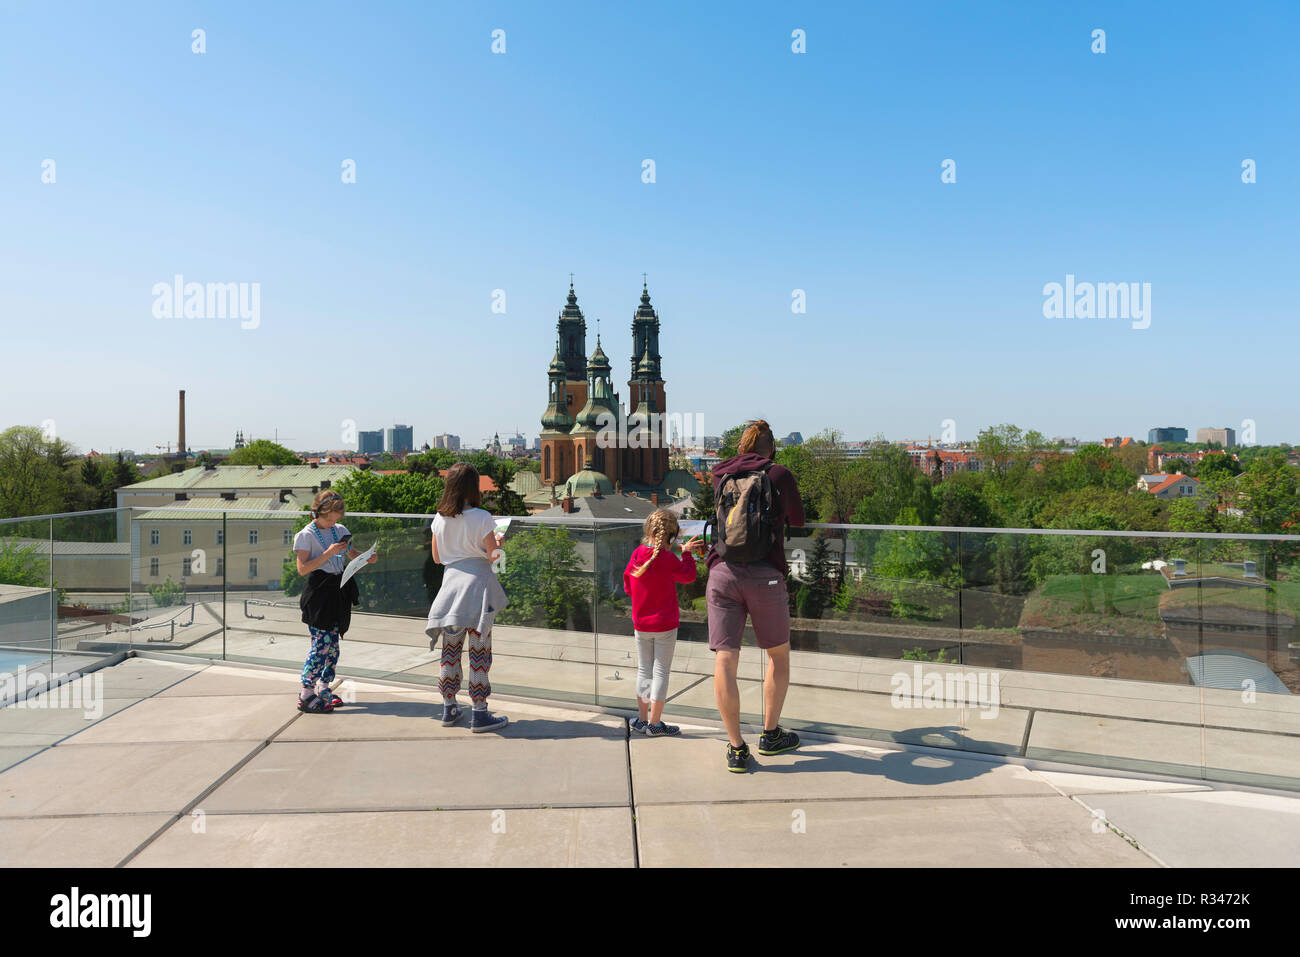 Porta Posnania Poznan, view of a family group standing on the roof of the Poznan Interactive Heritage Centre looking towards Cathedral Island, Poland. Stock Photo